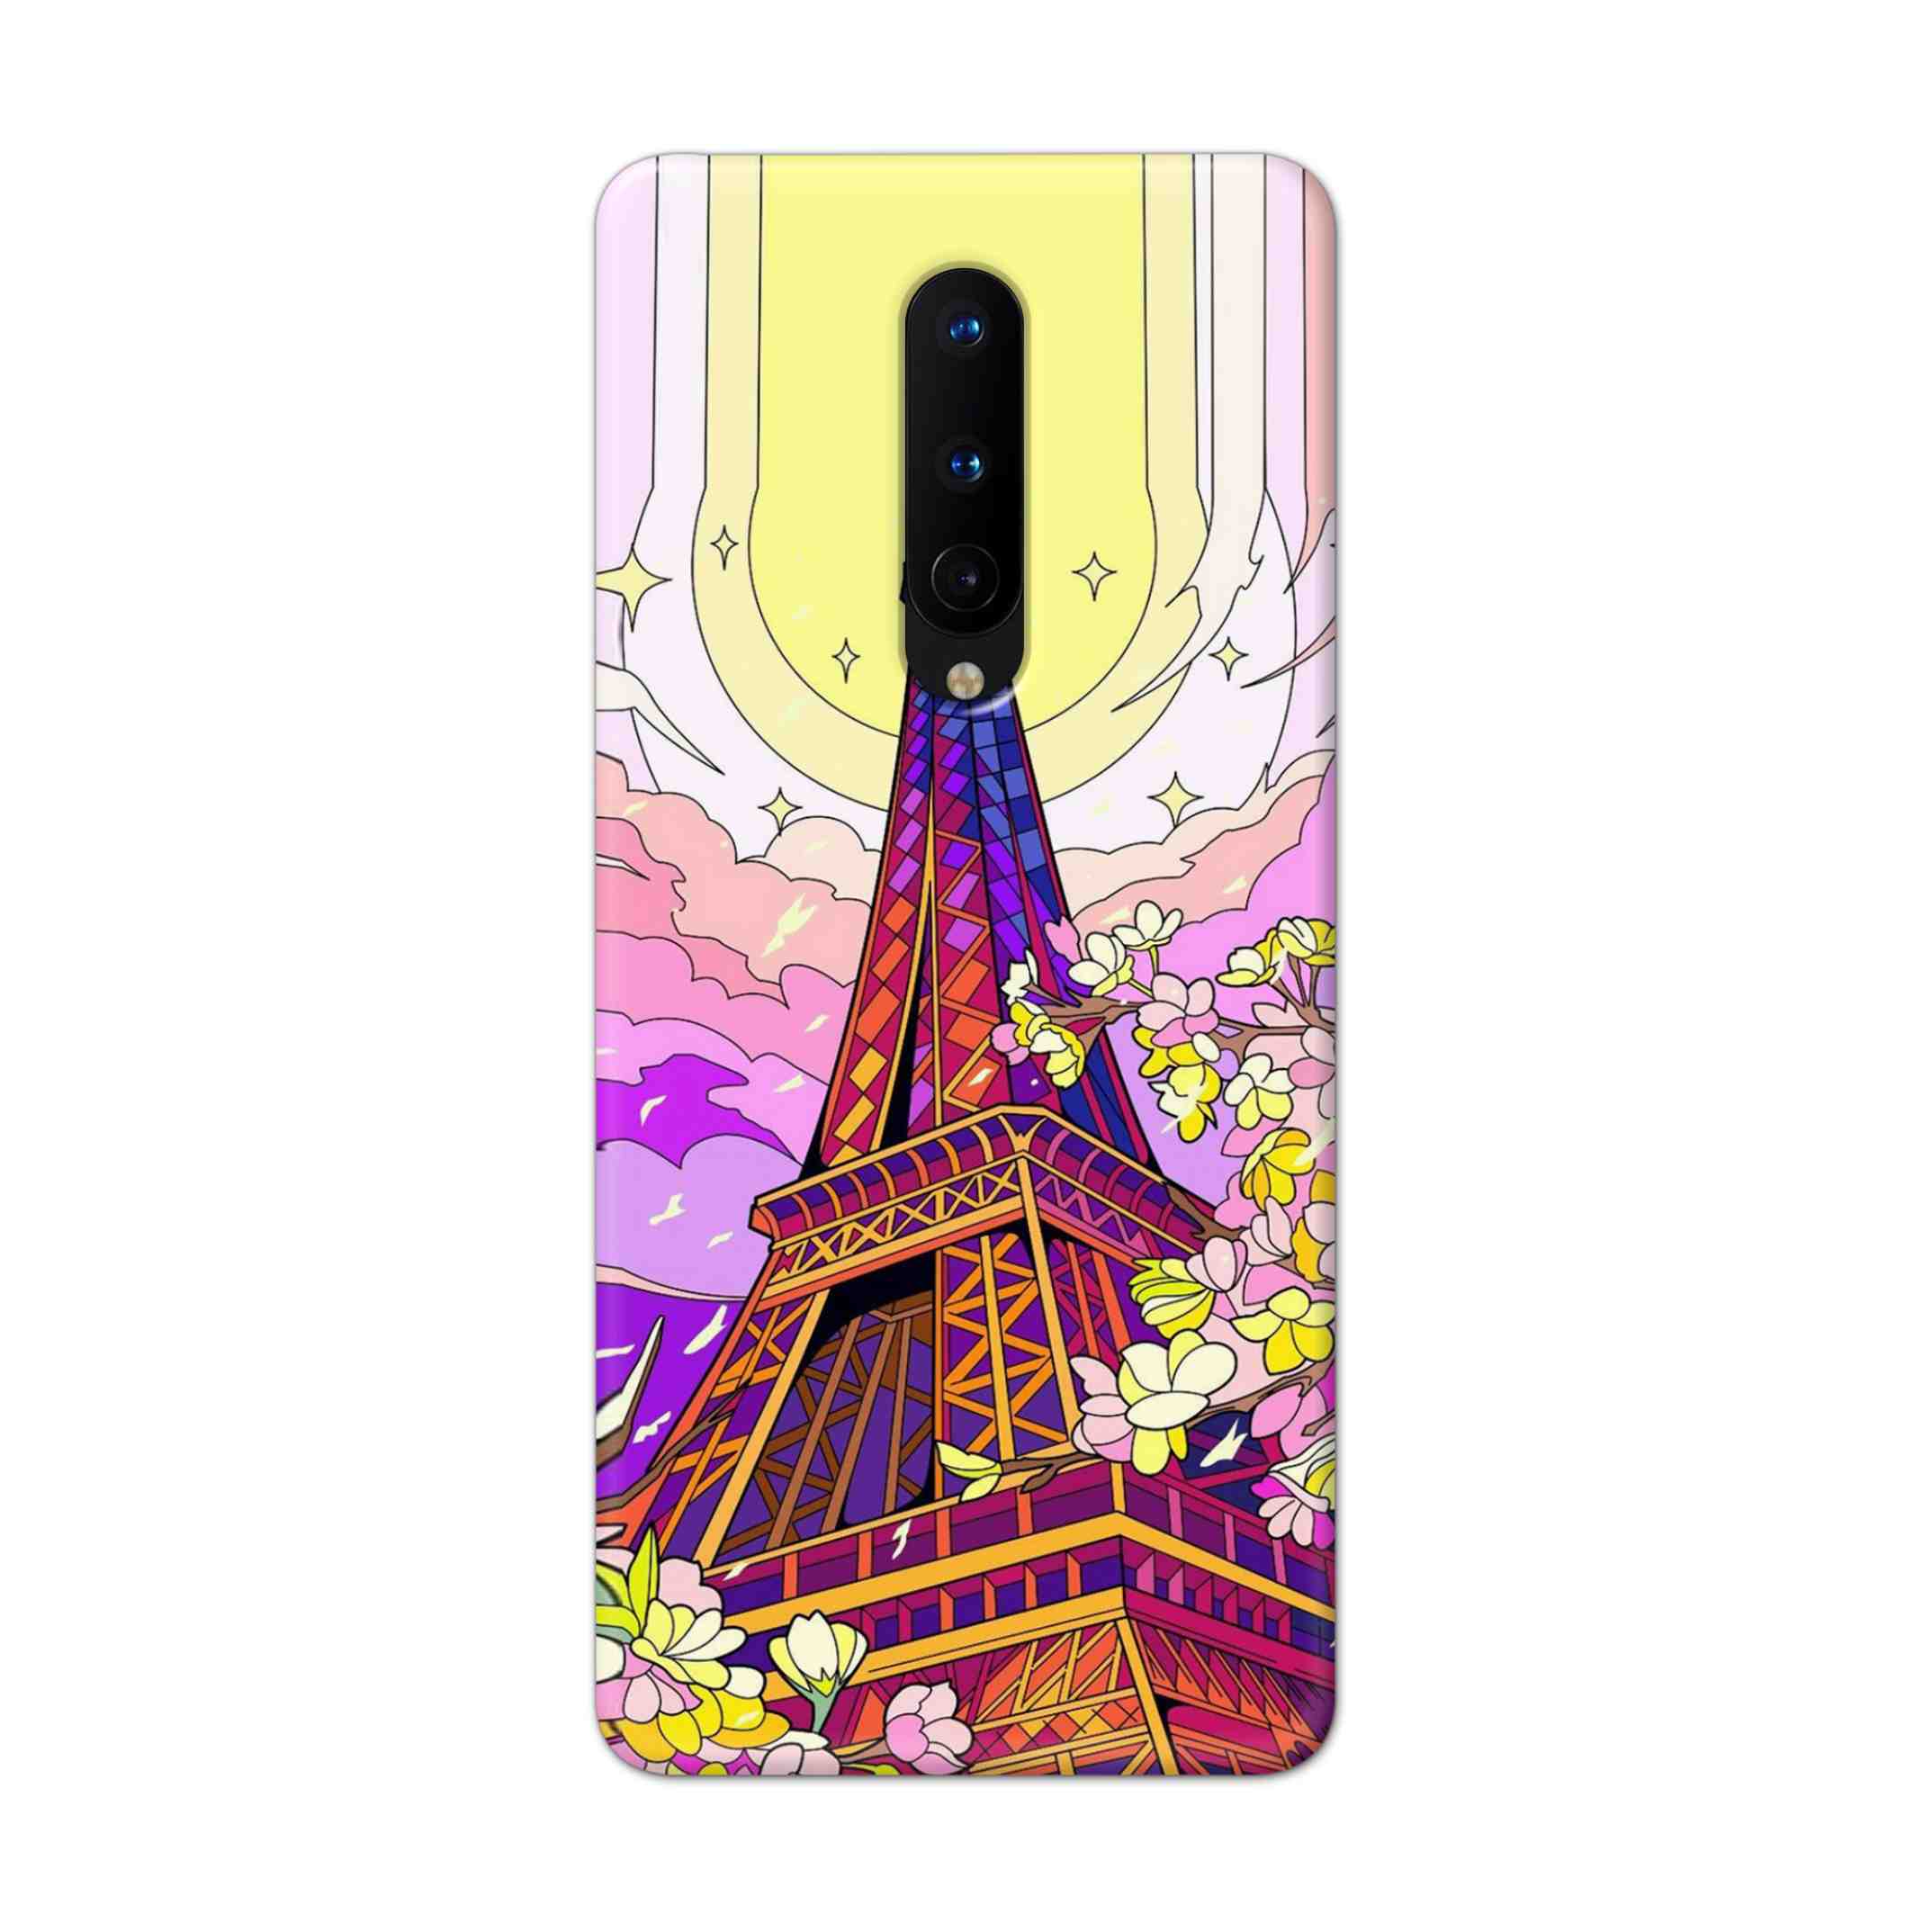 Buy Eiffel Tower Hard Back Mobile Phone Case Cover For OnePlus 8 Online